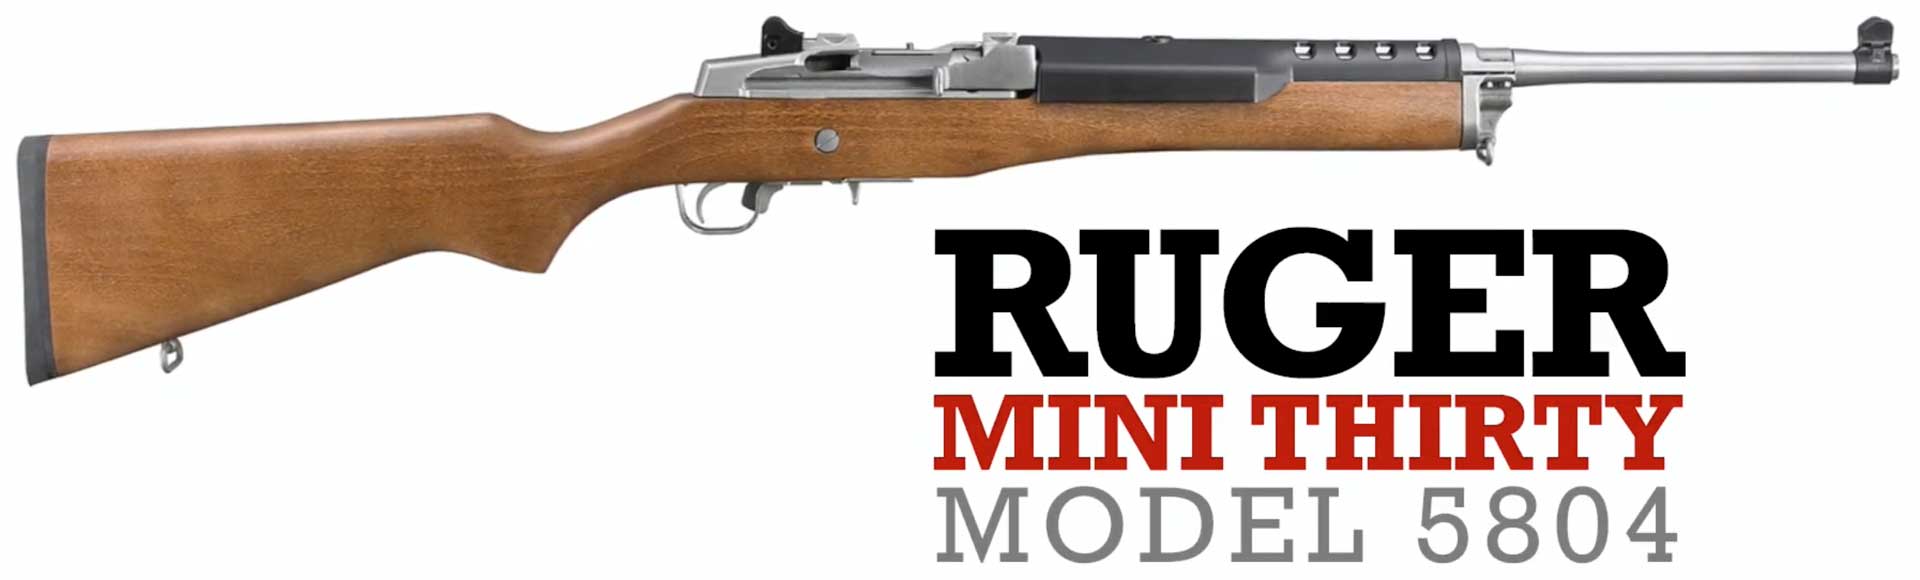 Right side ruger carbine wood metal stainless steel text on image noting: "Ruger Mini Thirty Model 5804"